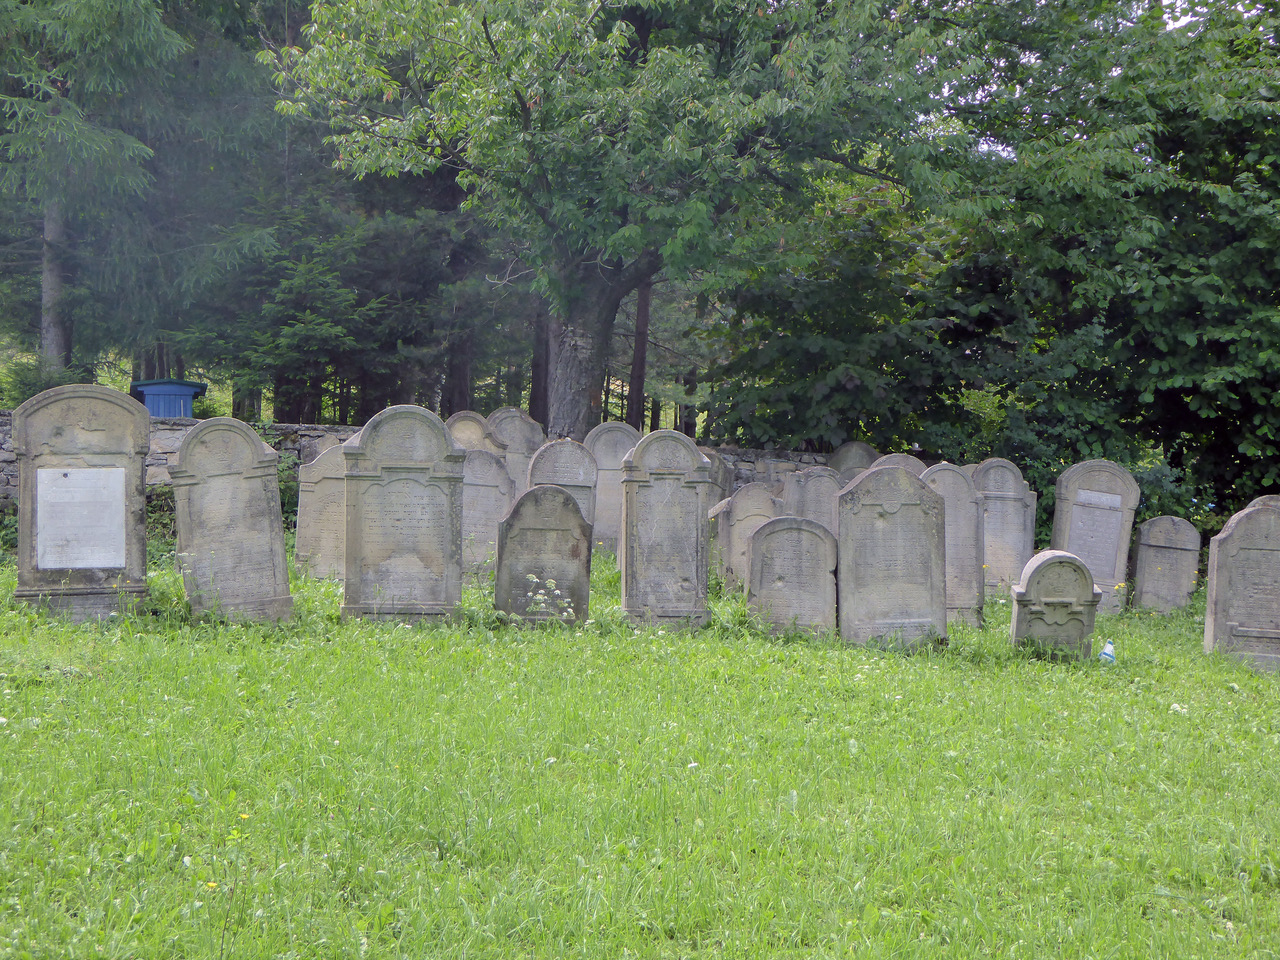 The New Cemetery